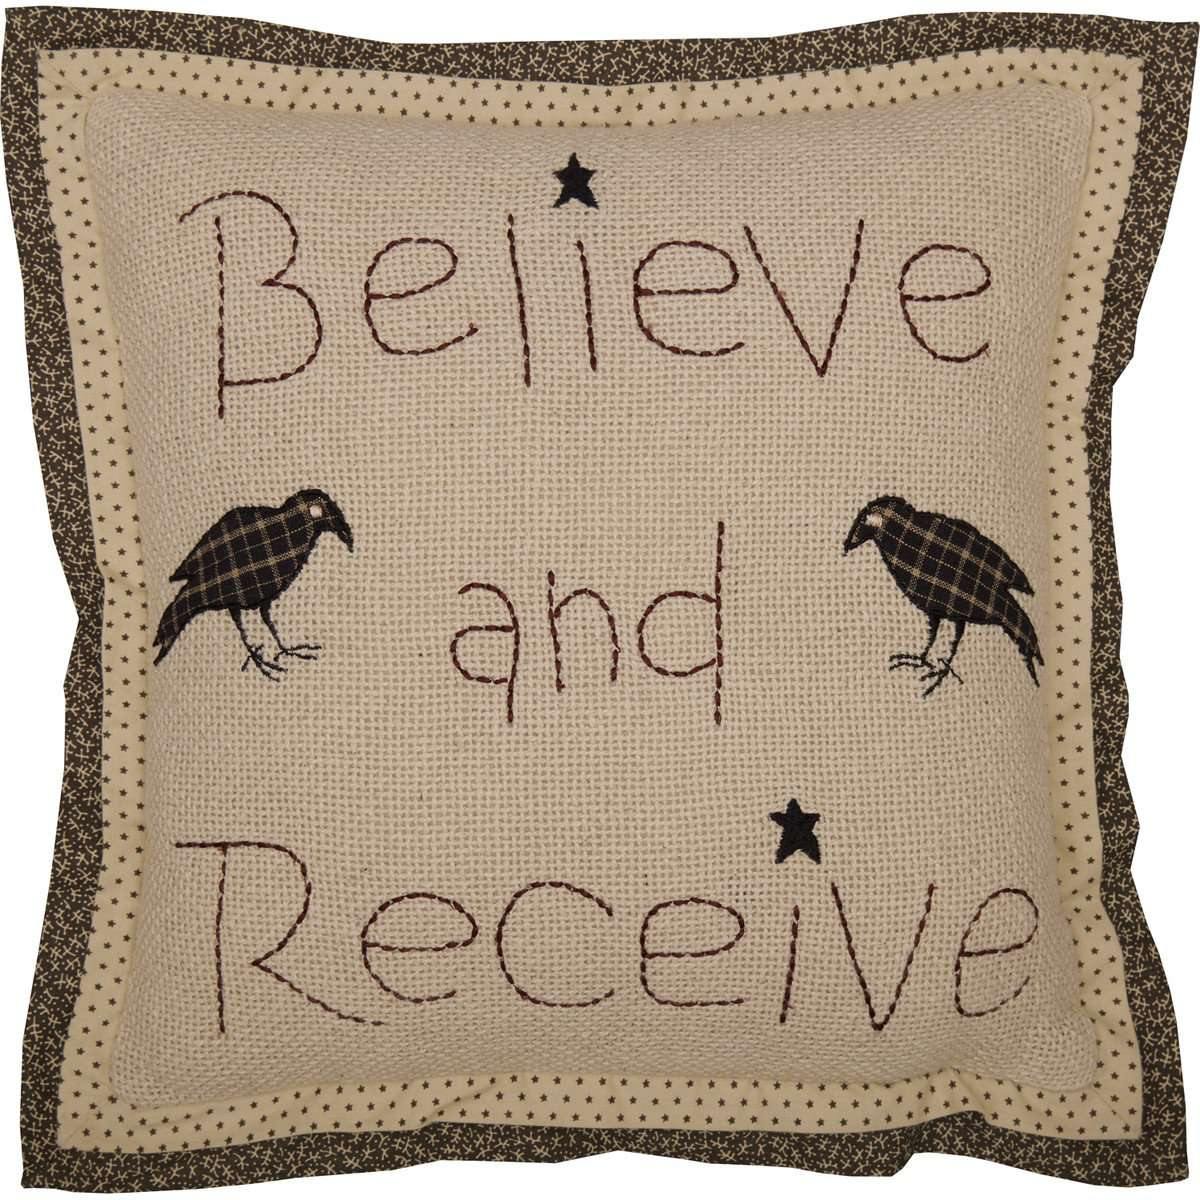 Kettle Grove Believe and Receive Pillow 12x12 VHC Brands front